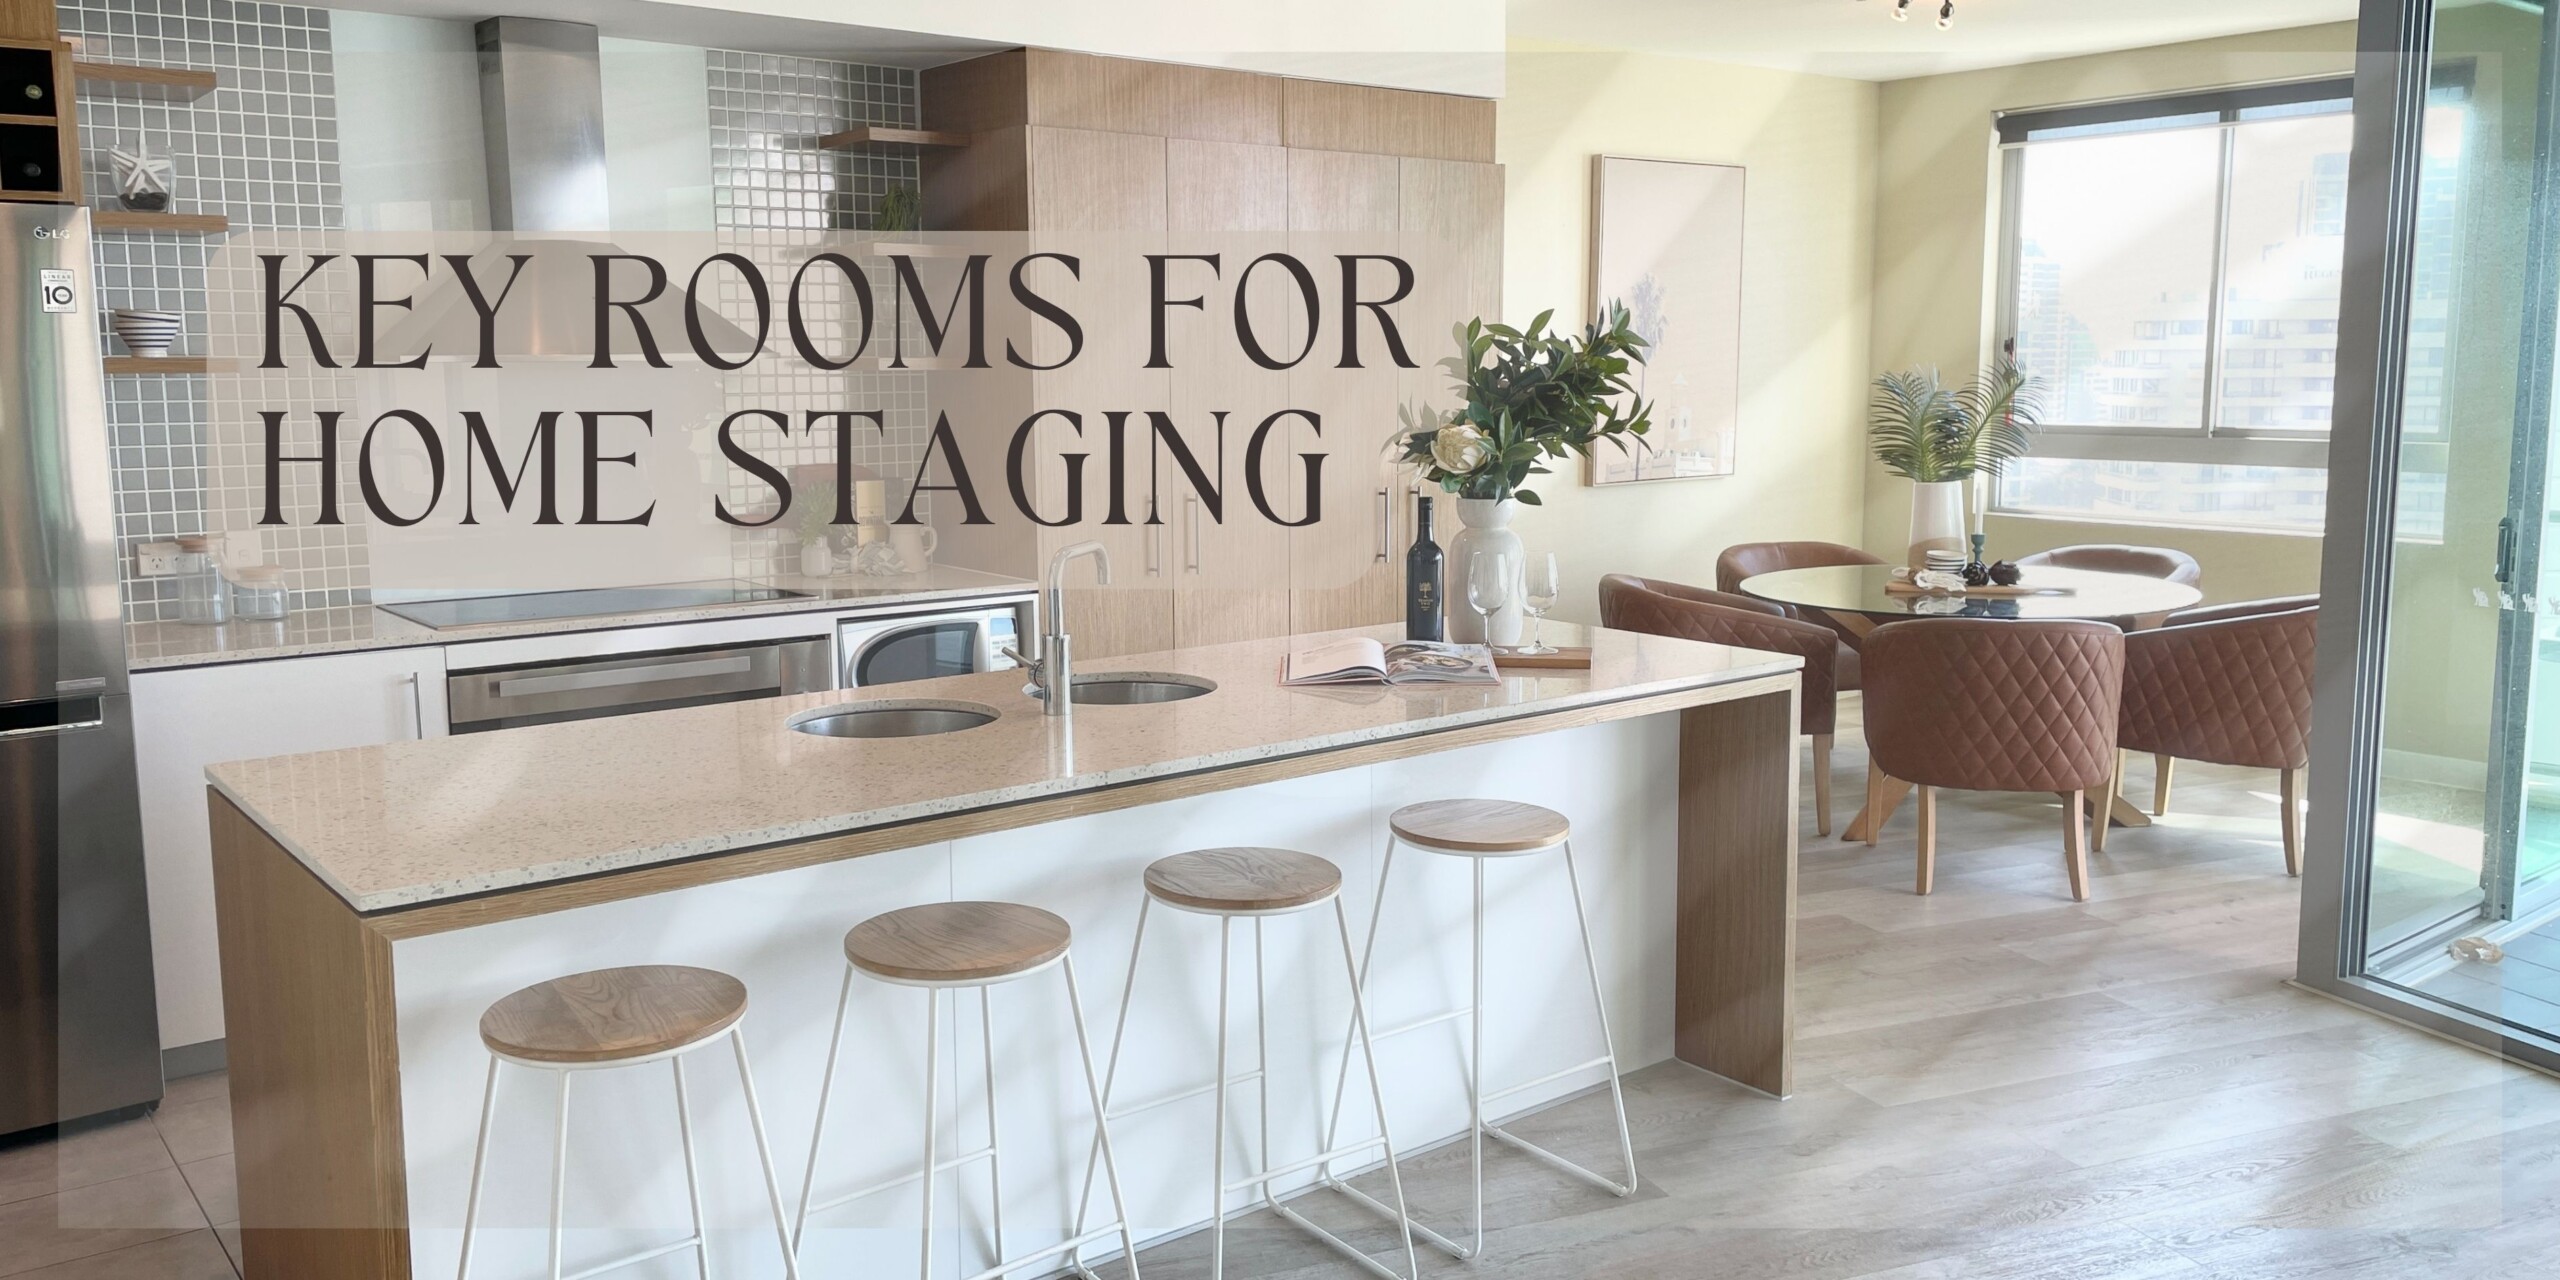 A styled kitchen and dining area, text overlayed says 'Key Rooms for Home Staging'